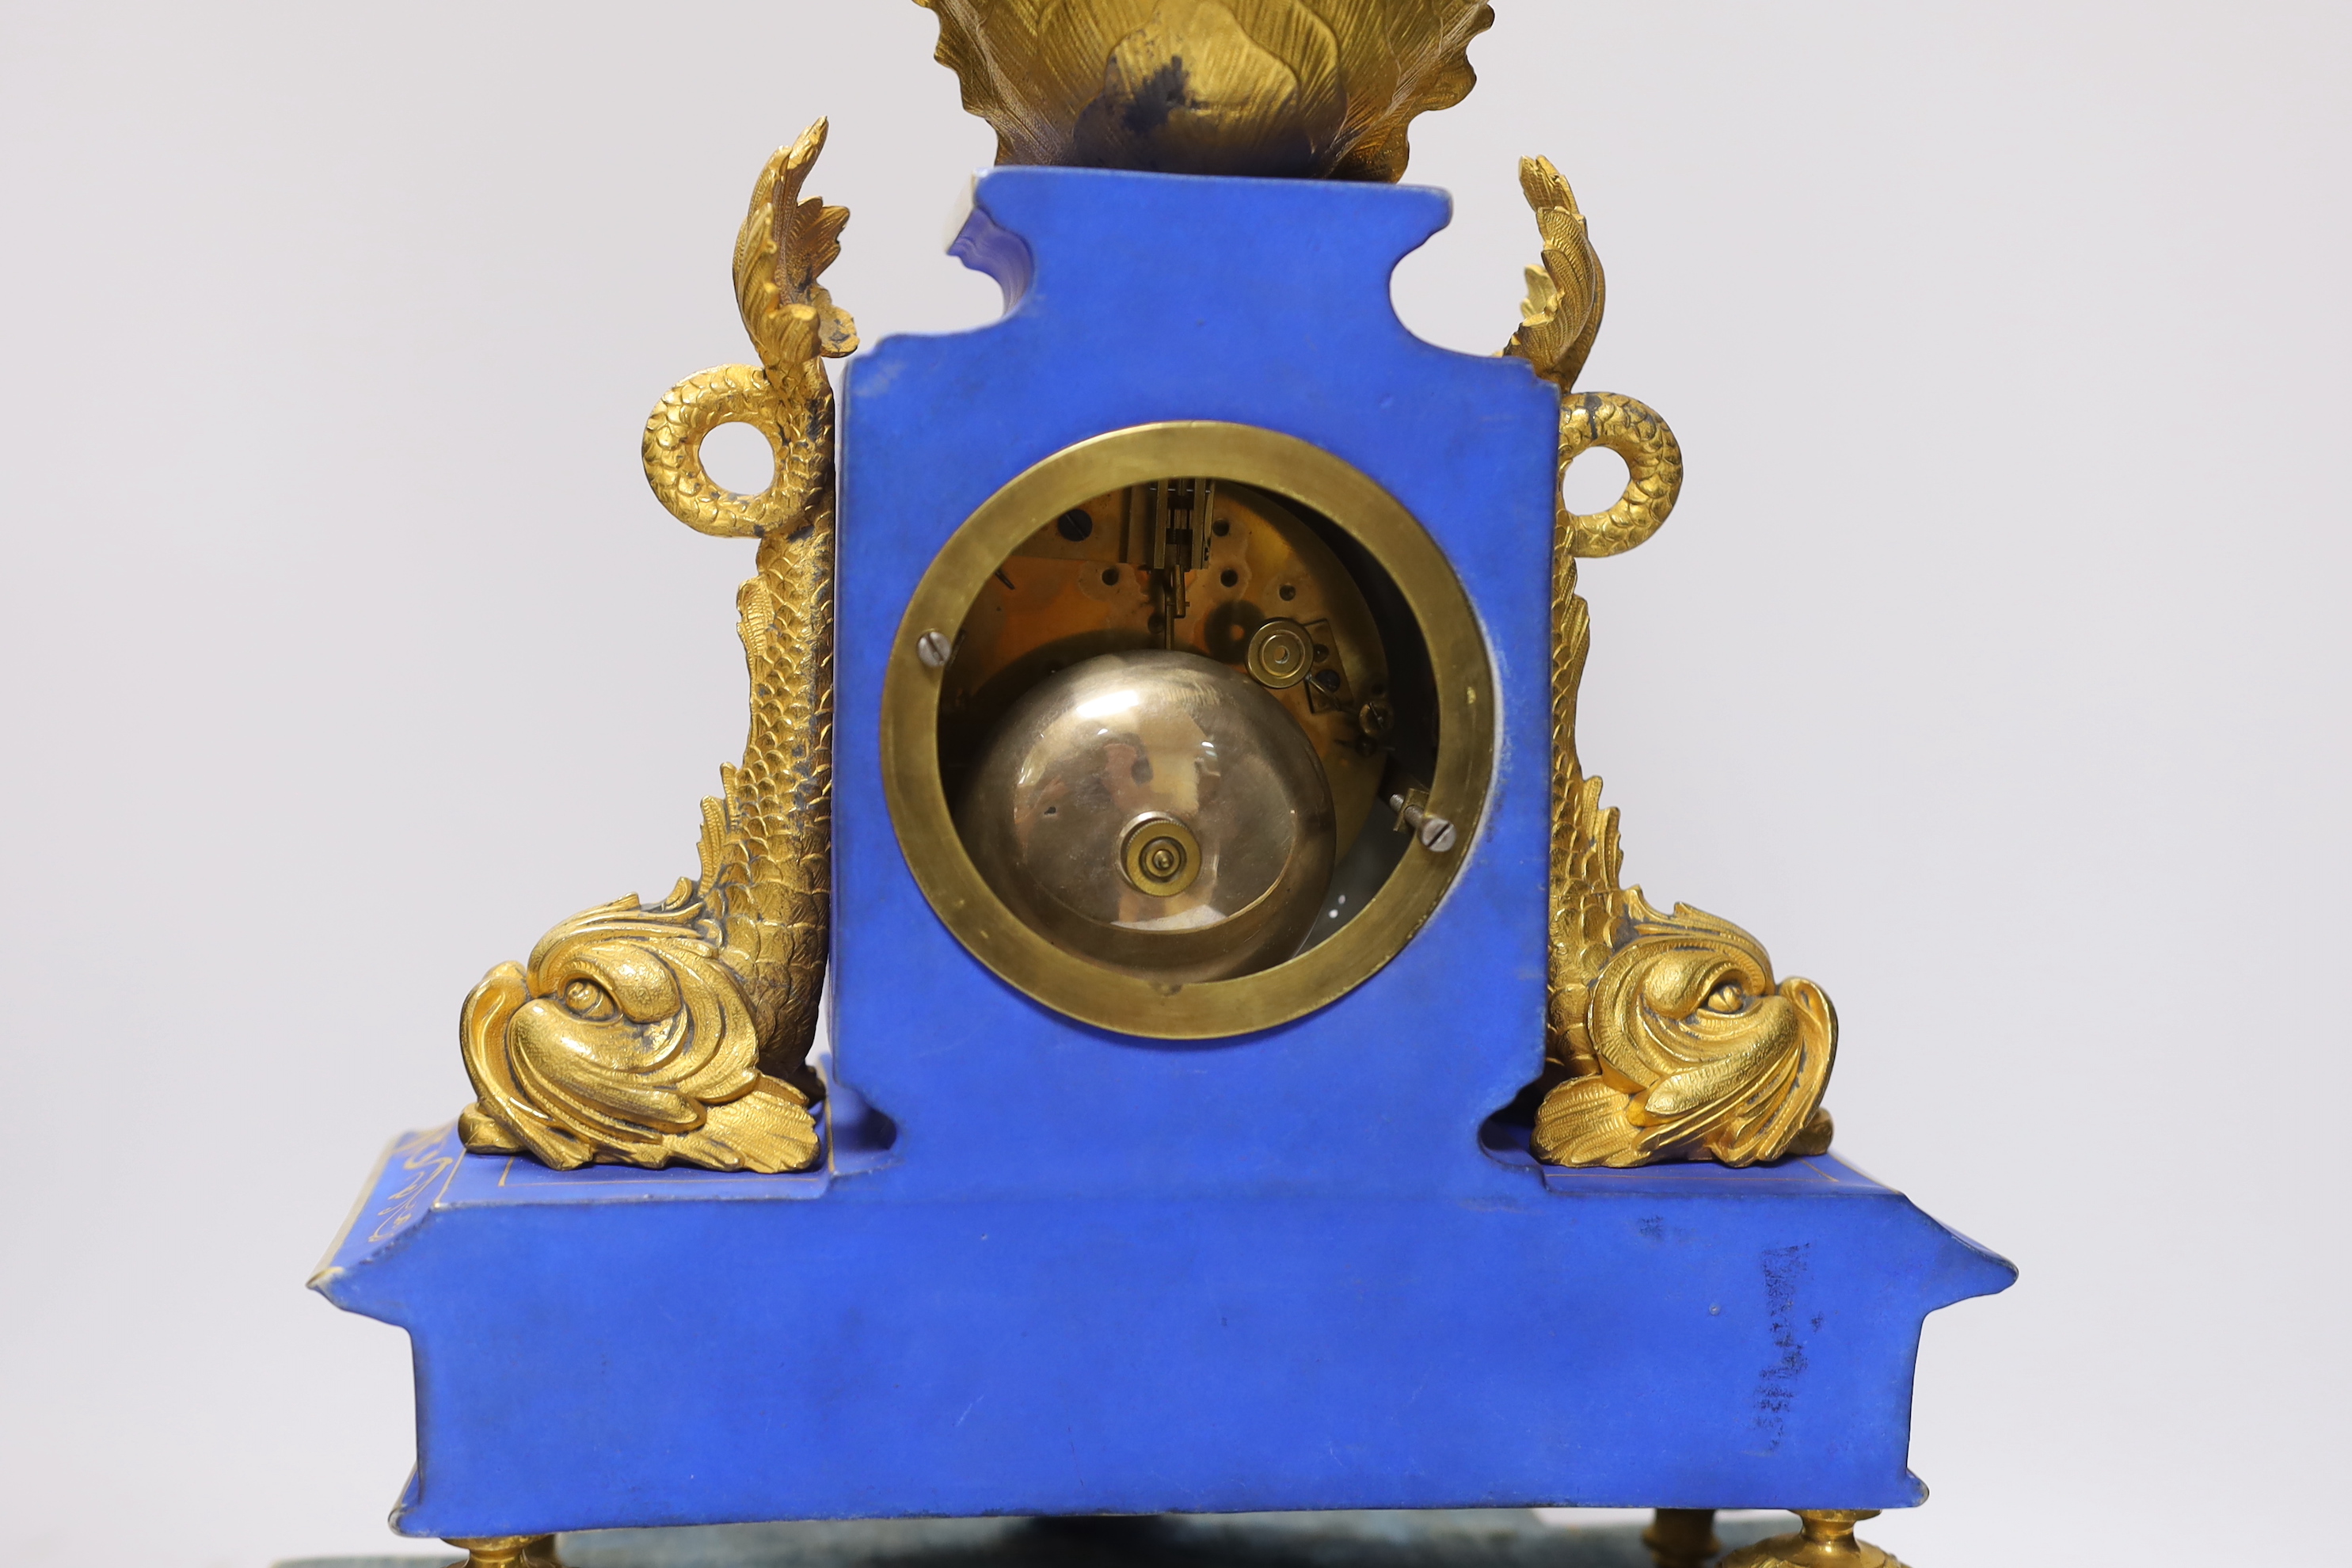 A 19th century French porcelain and gilt mantel clock under glass dome, striking on a bell, the face signed Muller, 48cm high, under dome